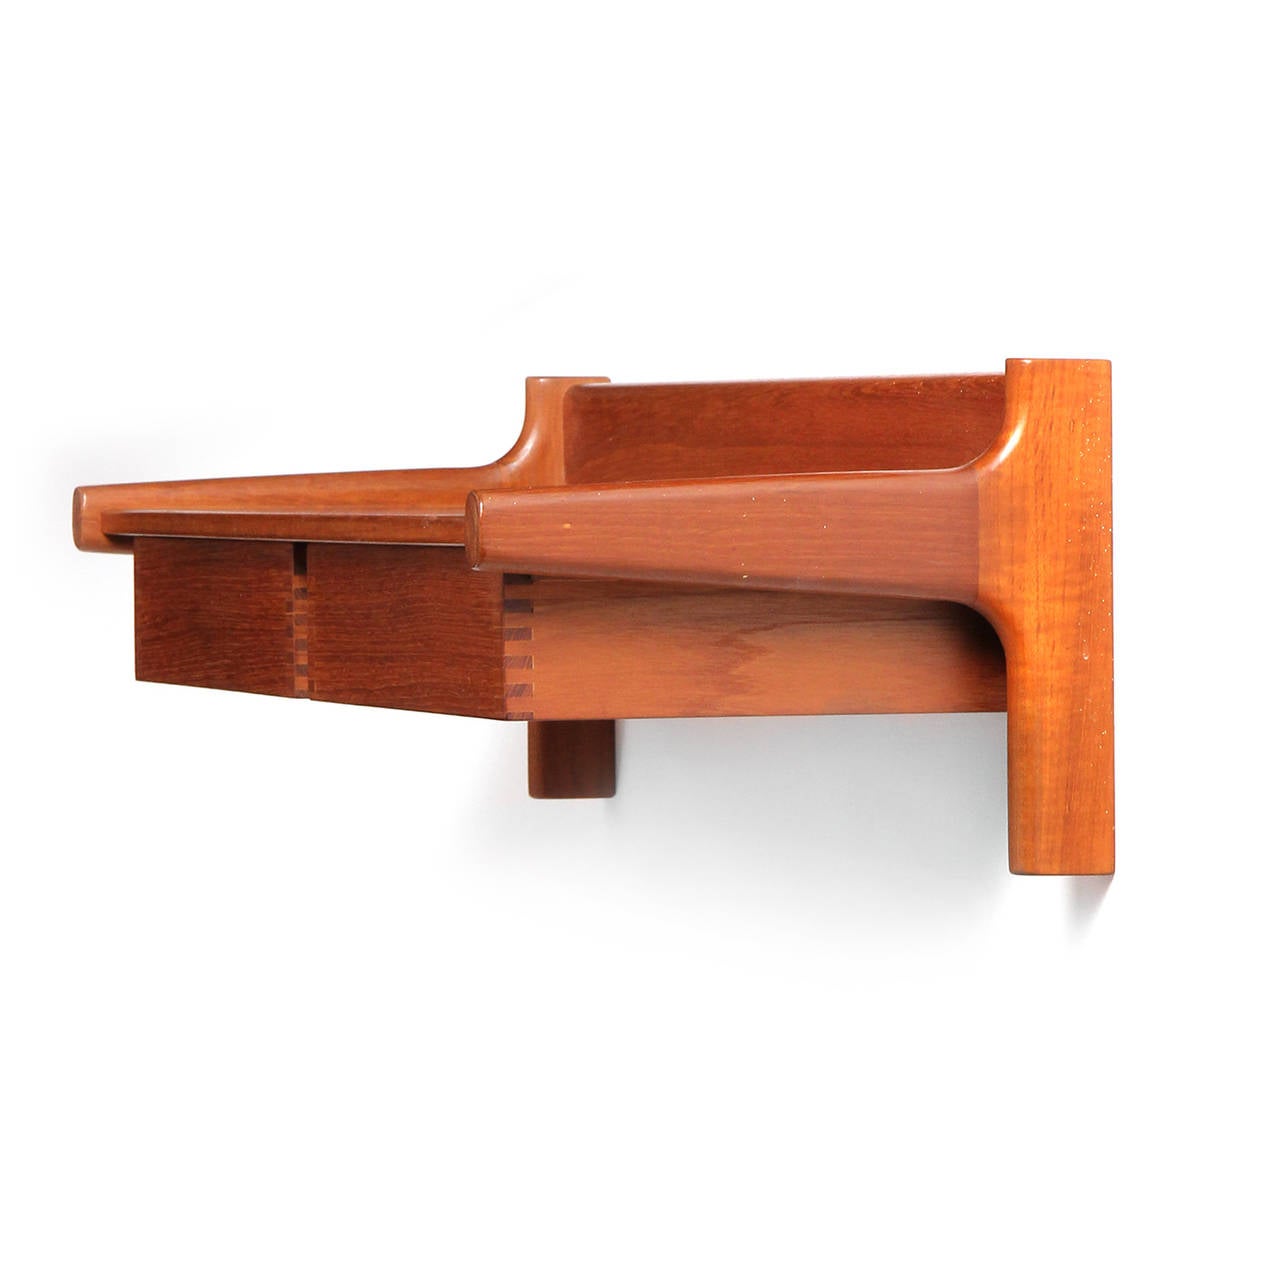 A teak wall mount shelf with two floating, finger-jointed drawers.